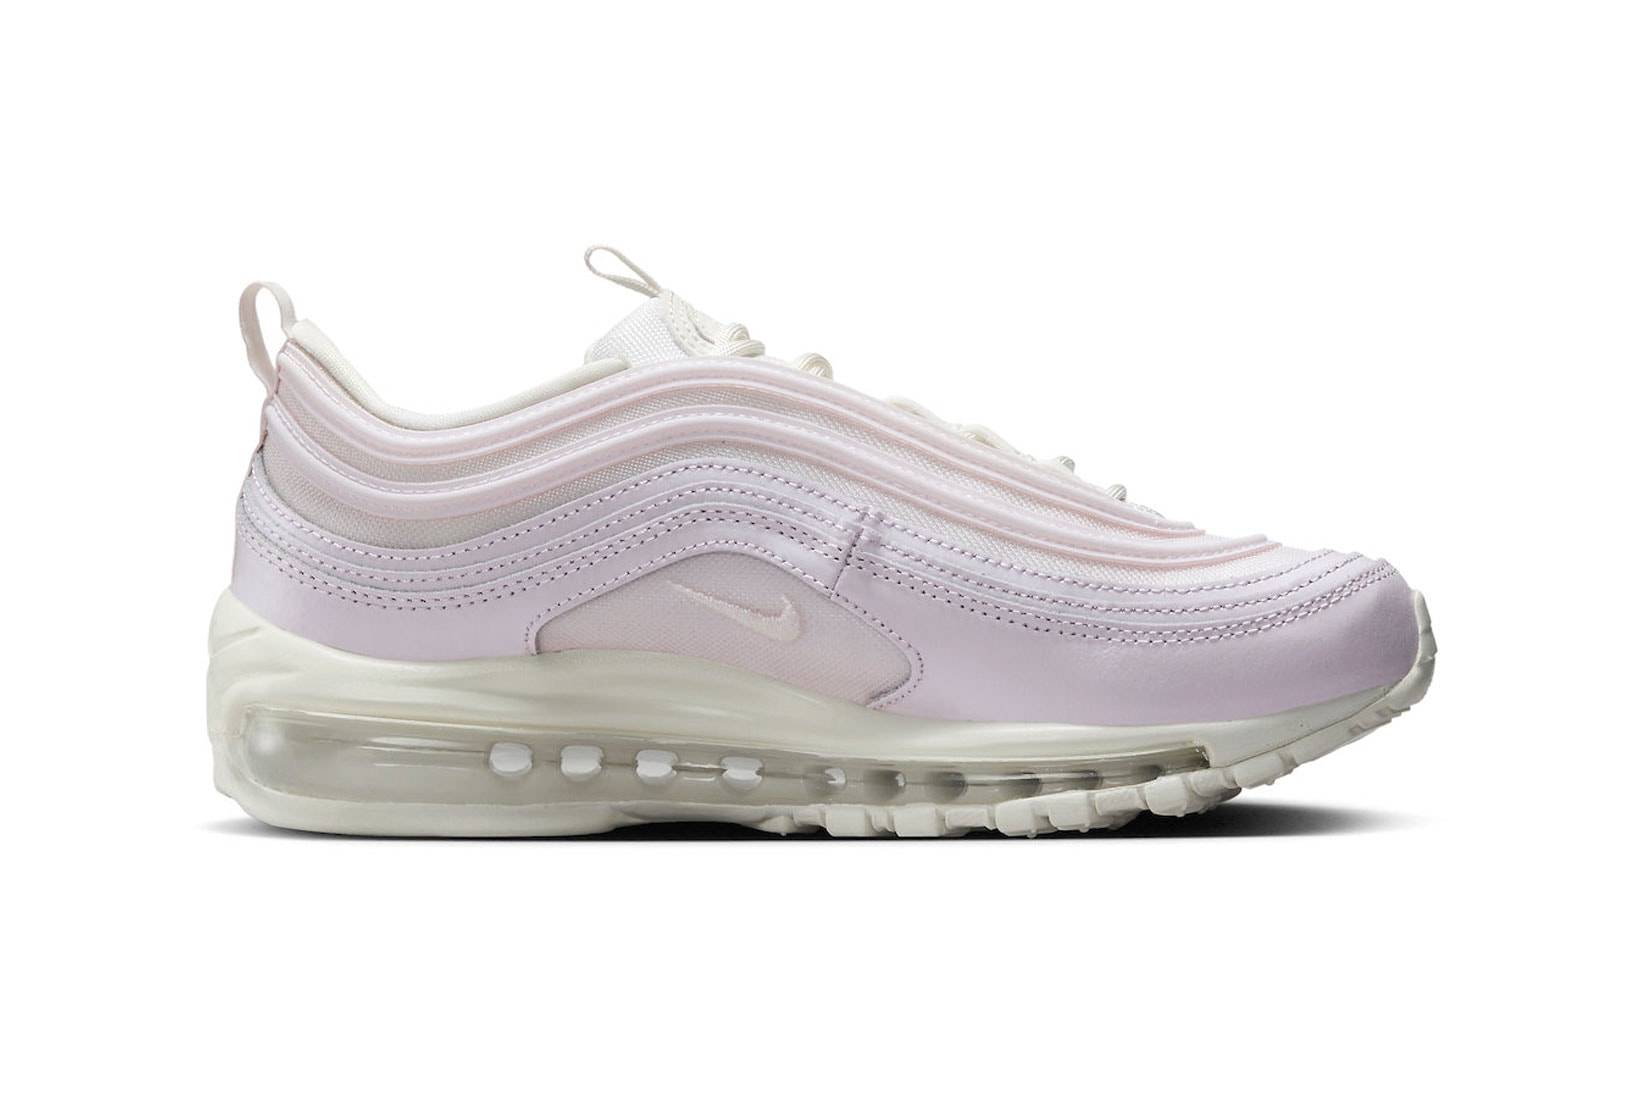 Nike Air Max 97 "Pink" Women's Exclusive Sneaker Release Where to buy